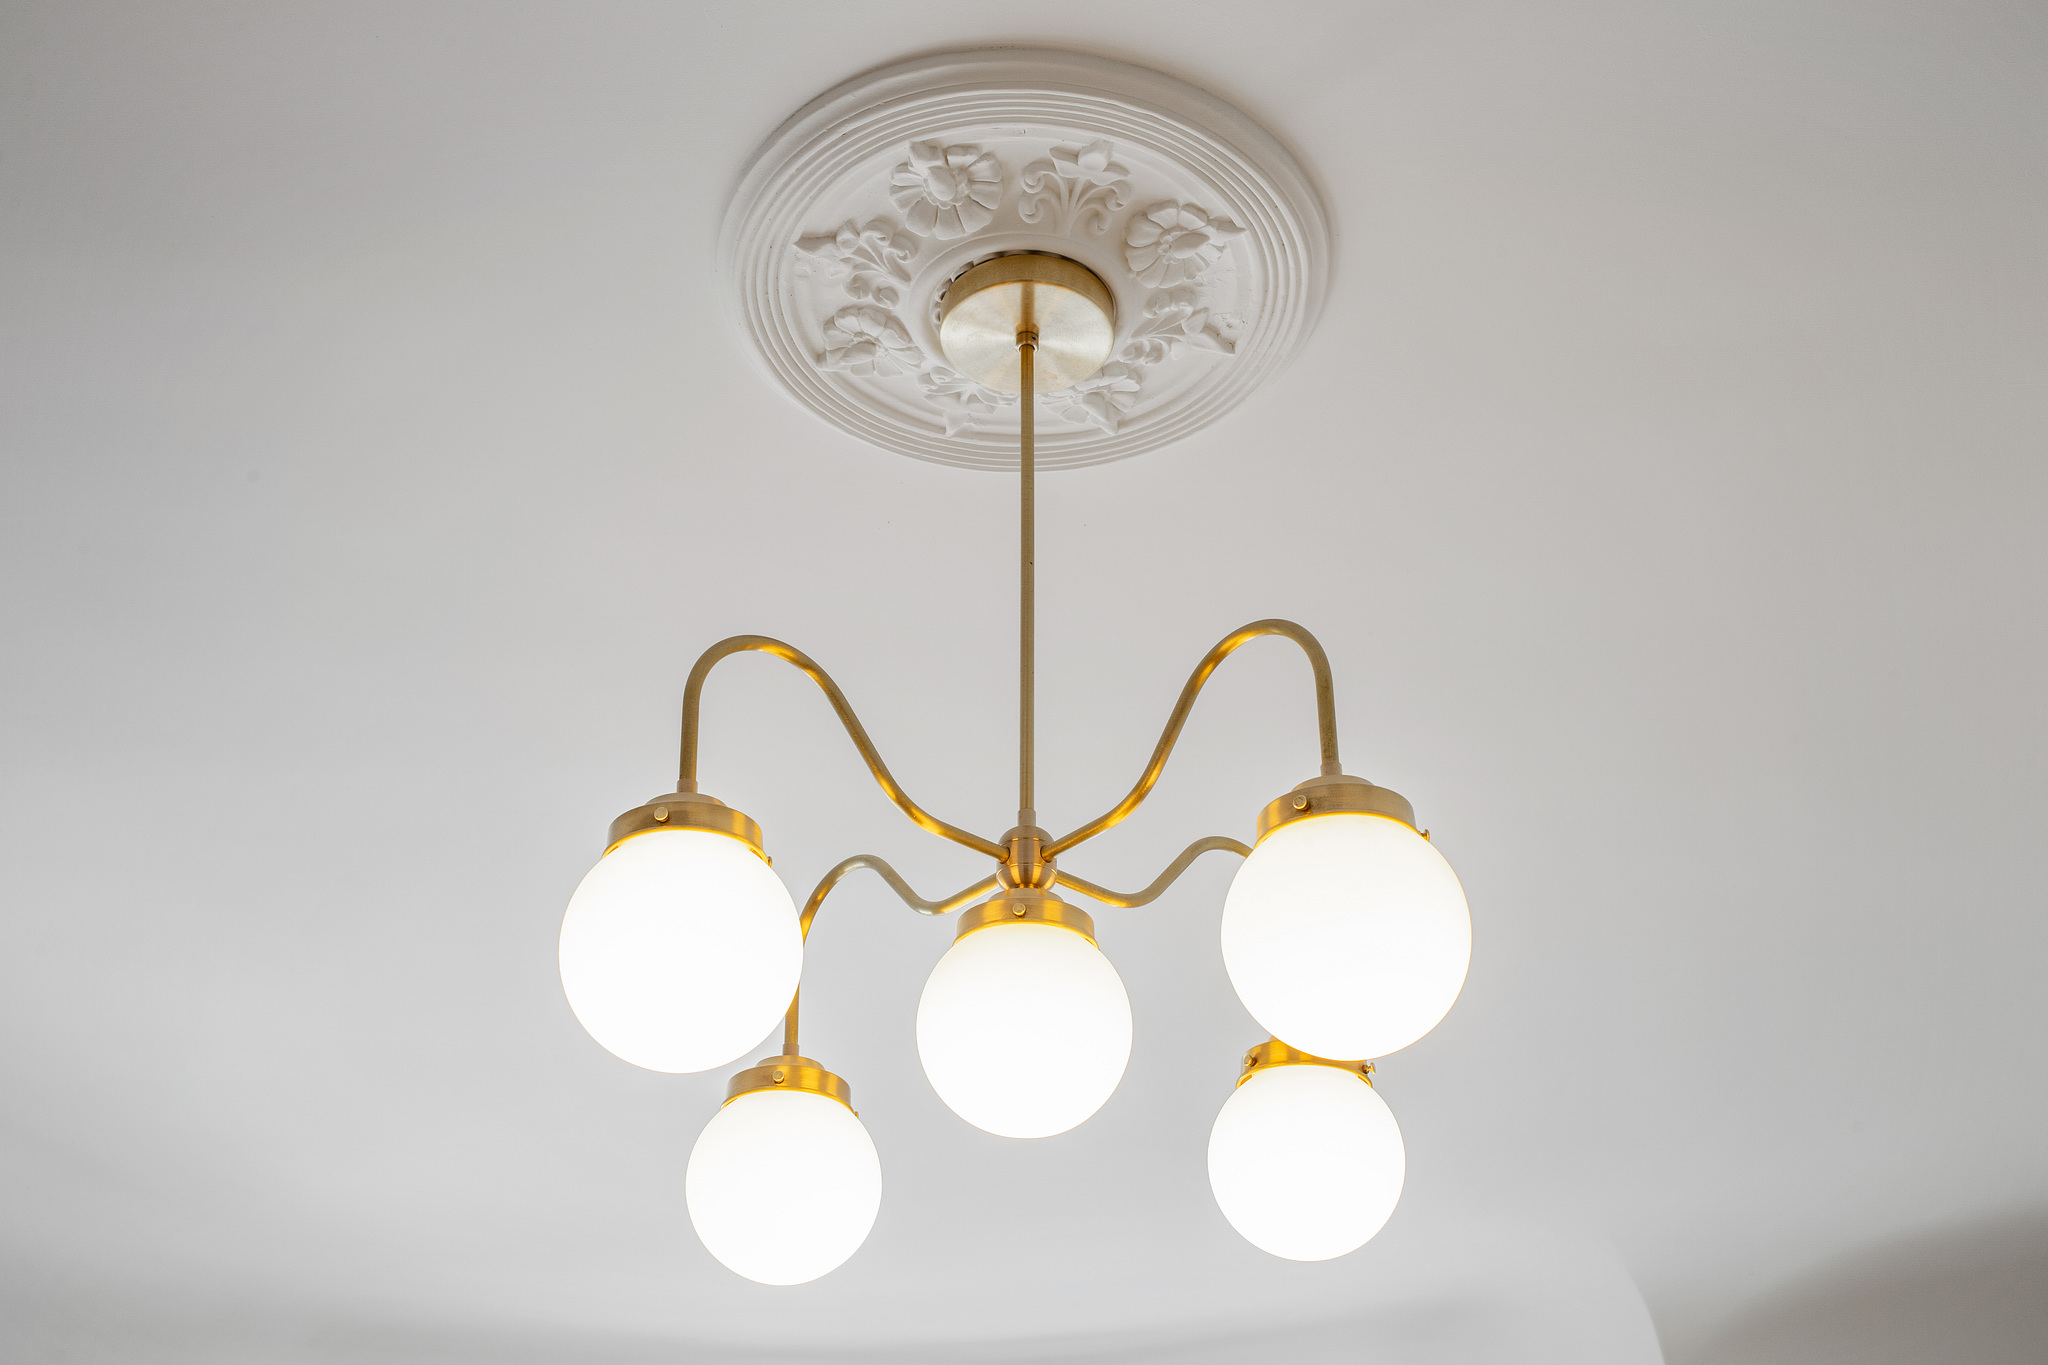 Close-up vide of a fixture with custom plaster medallion